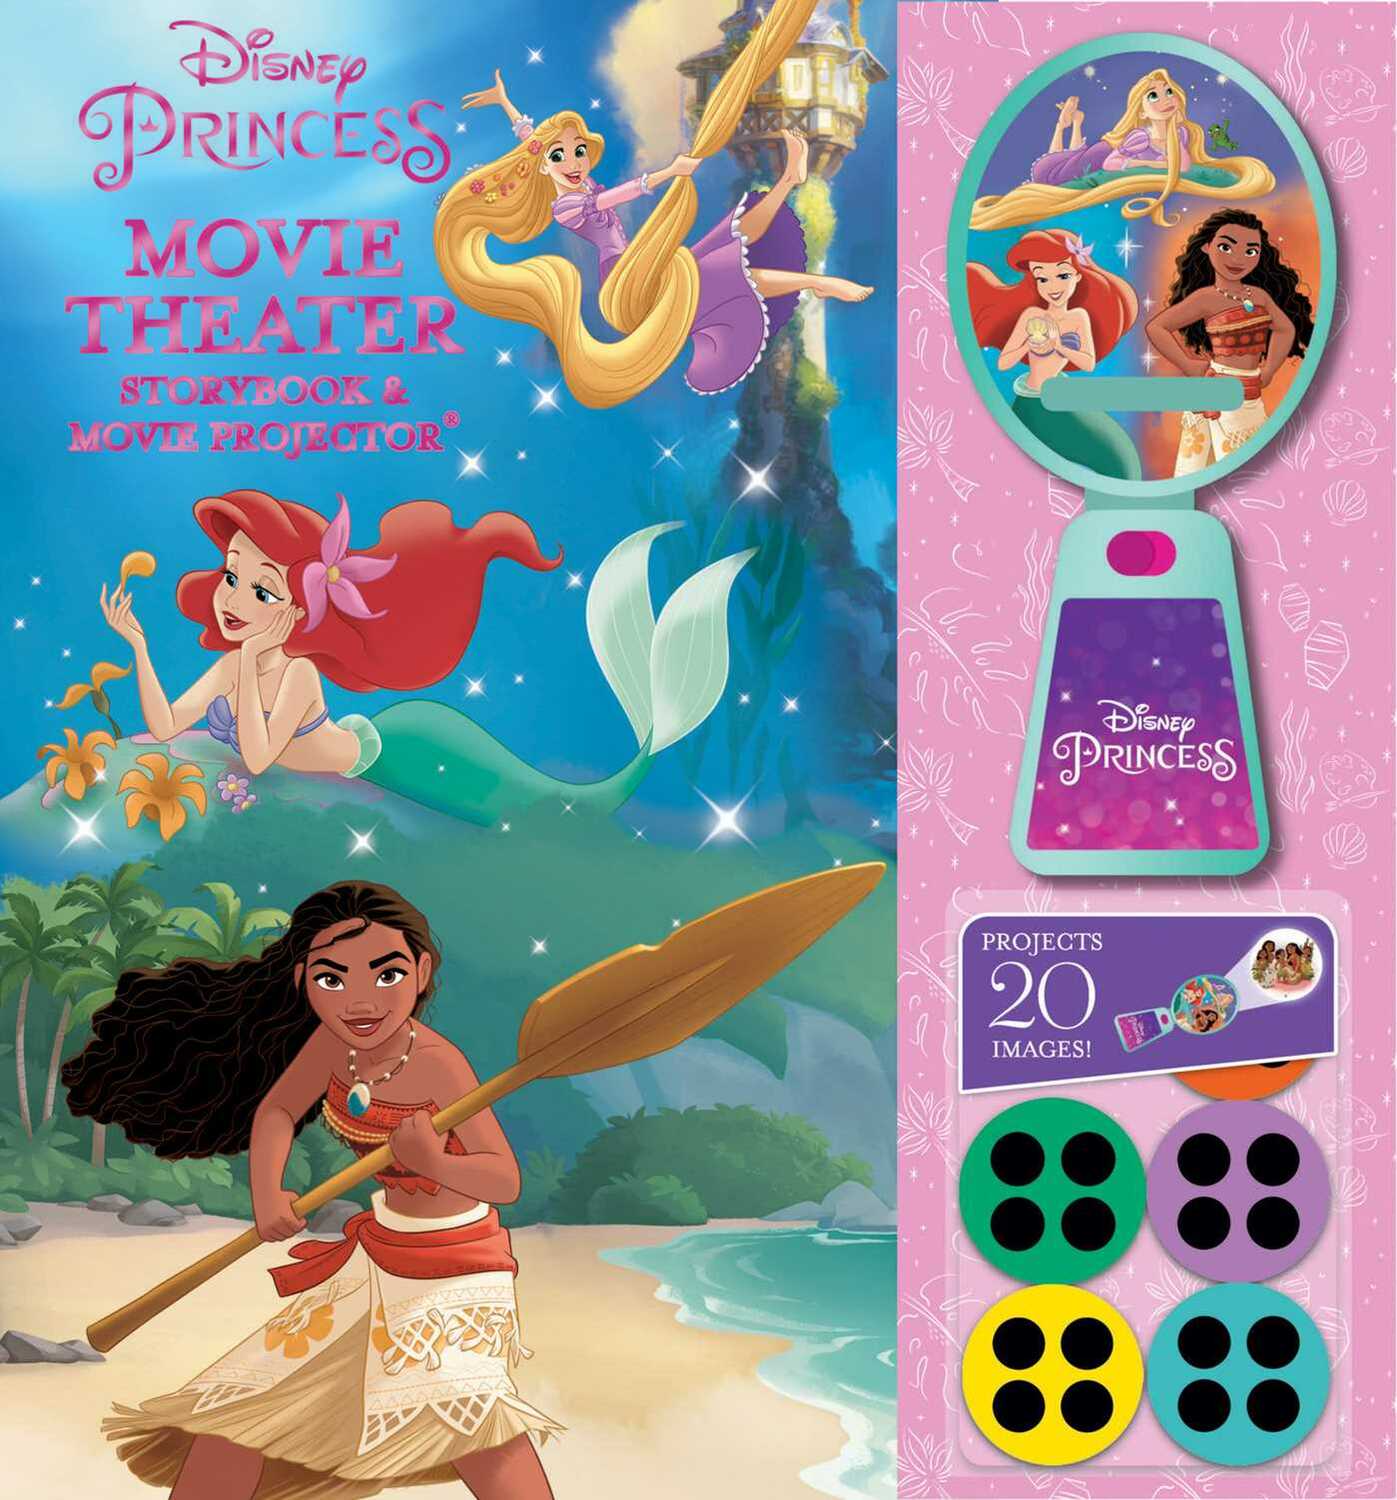 Disney Princess: Moana, Rapunzel, and Ariel Movie Theater Storybook &amp; Movie Projector